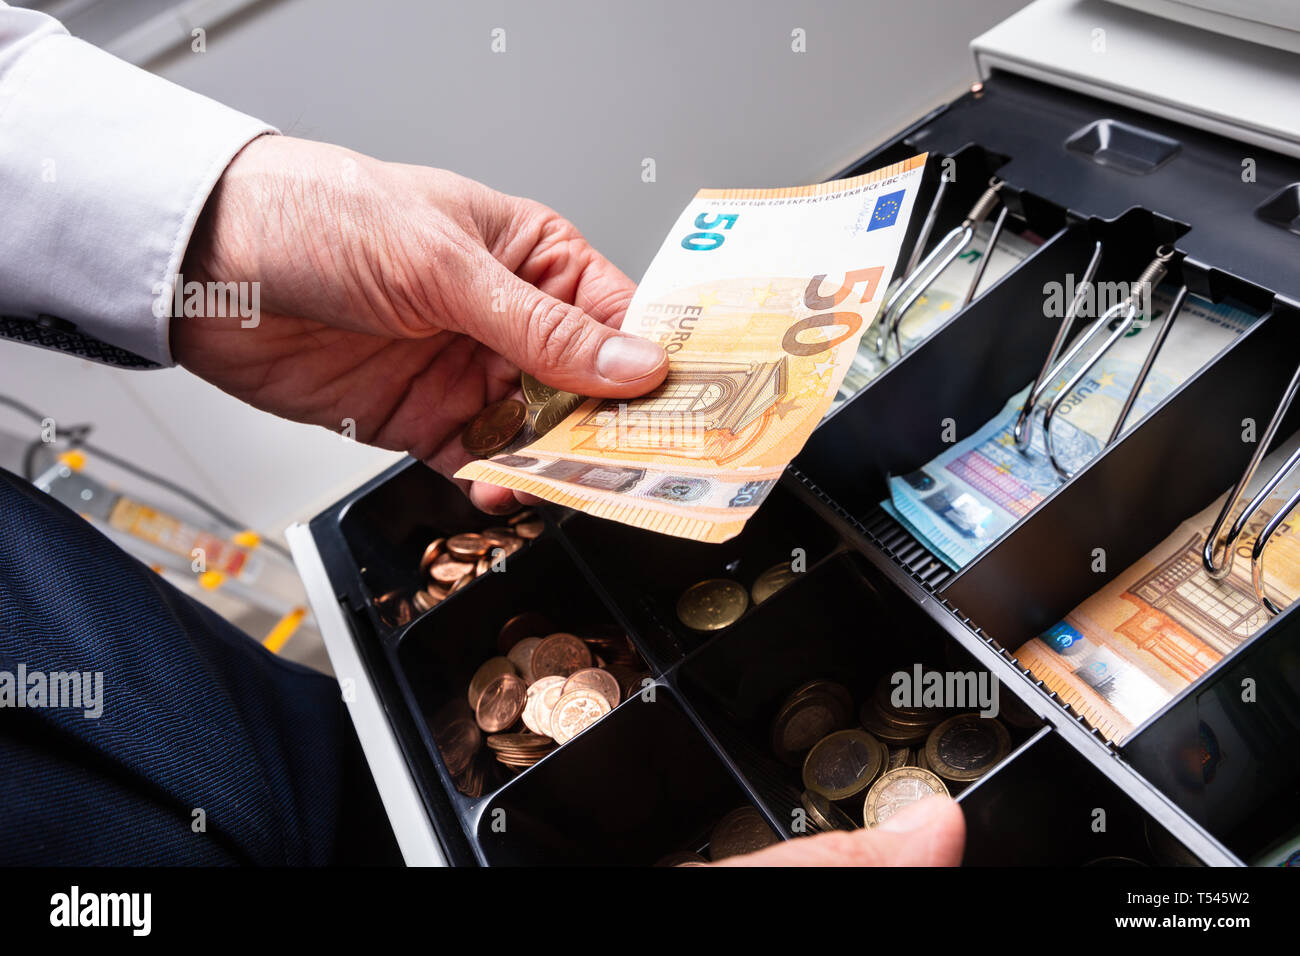 An Overhead View Of Cashier's Hand Taking Banknote From Opened Till Stock Photo